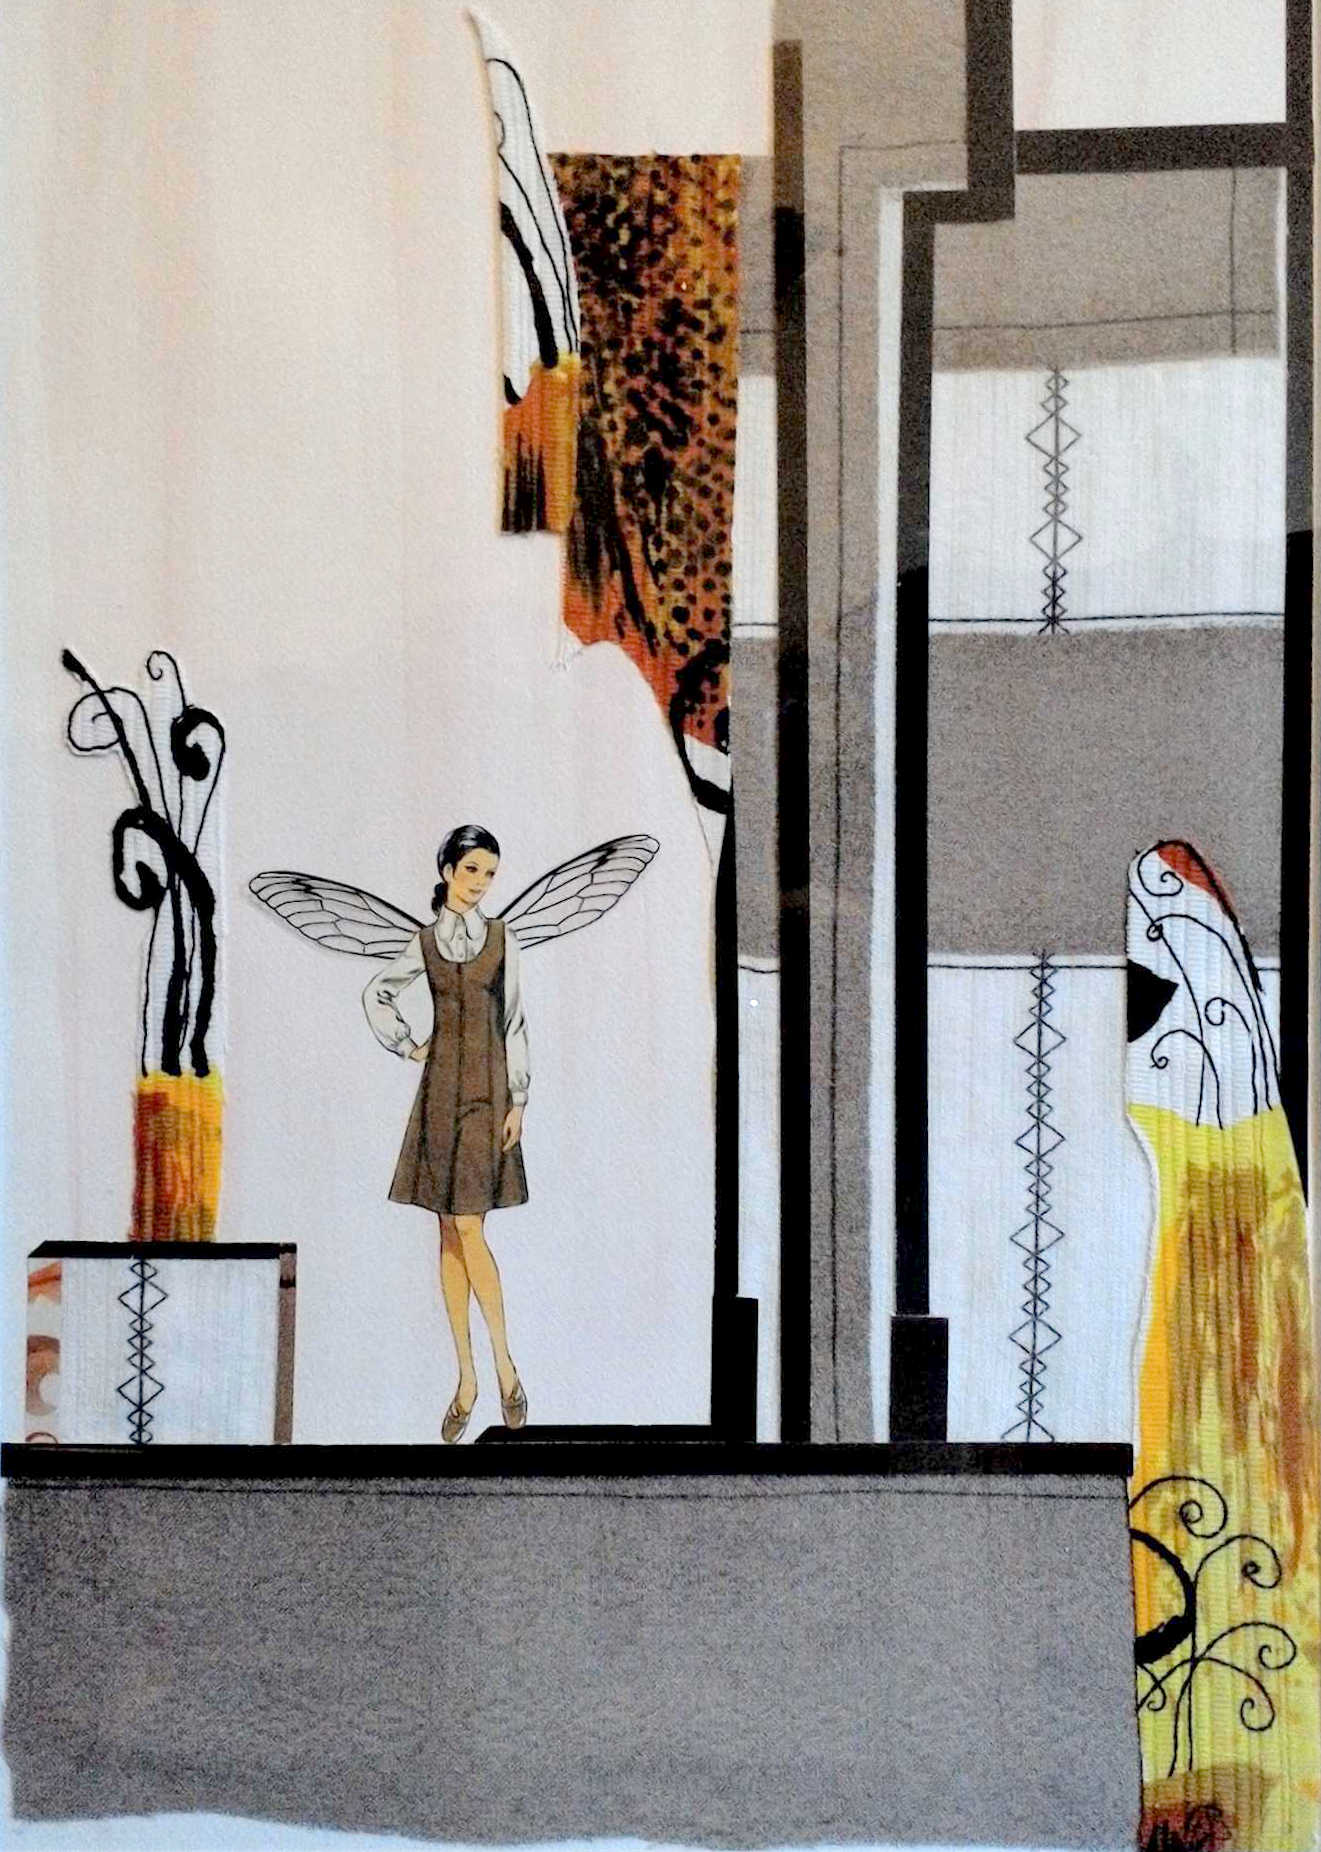 Collage work "Nola started her own interior design business" by Libby Bloxham. The collage centres on a fashion figure illustration typical of vintage sewing patterns, a woman in 70s style smart casual clothes, with acetate insect wings placed at her shoulders. She stands over a plain background, while around her swatches of vintage fabric, card and illustrations loosely describe the features of a room interior, like a feature wall and a table with a vase. The work predominantly features warm brown tones with gold highlights.